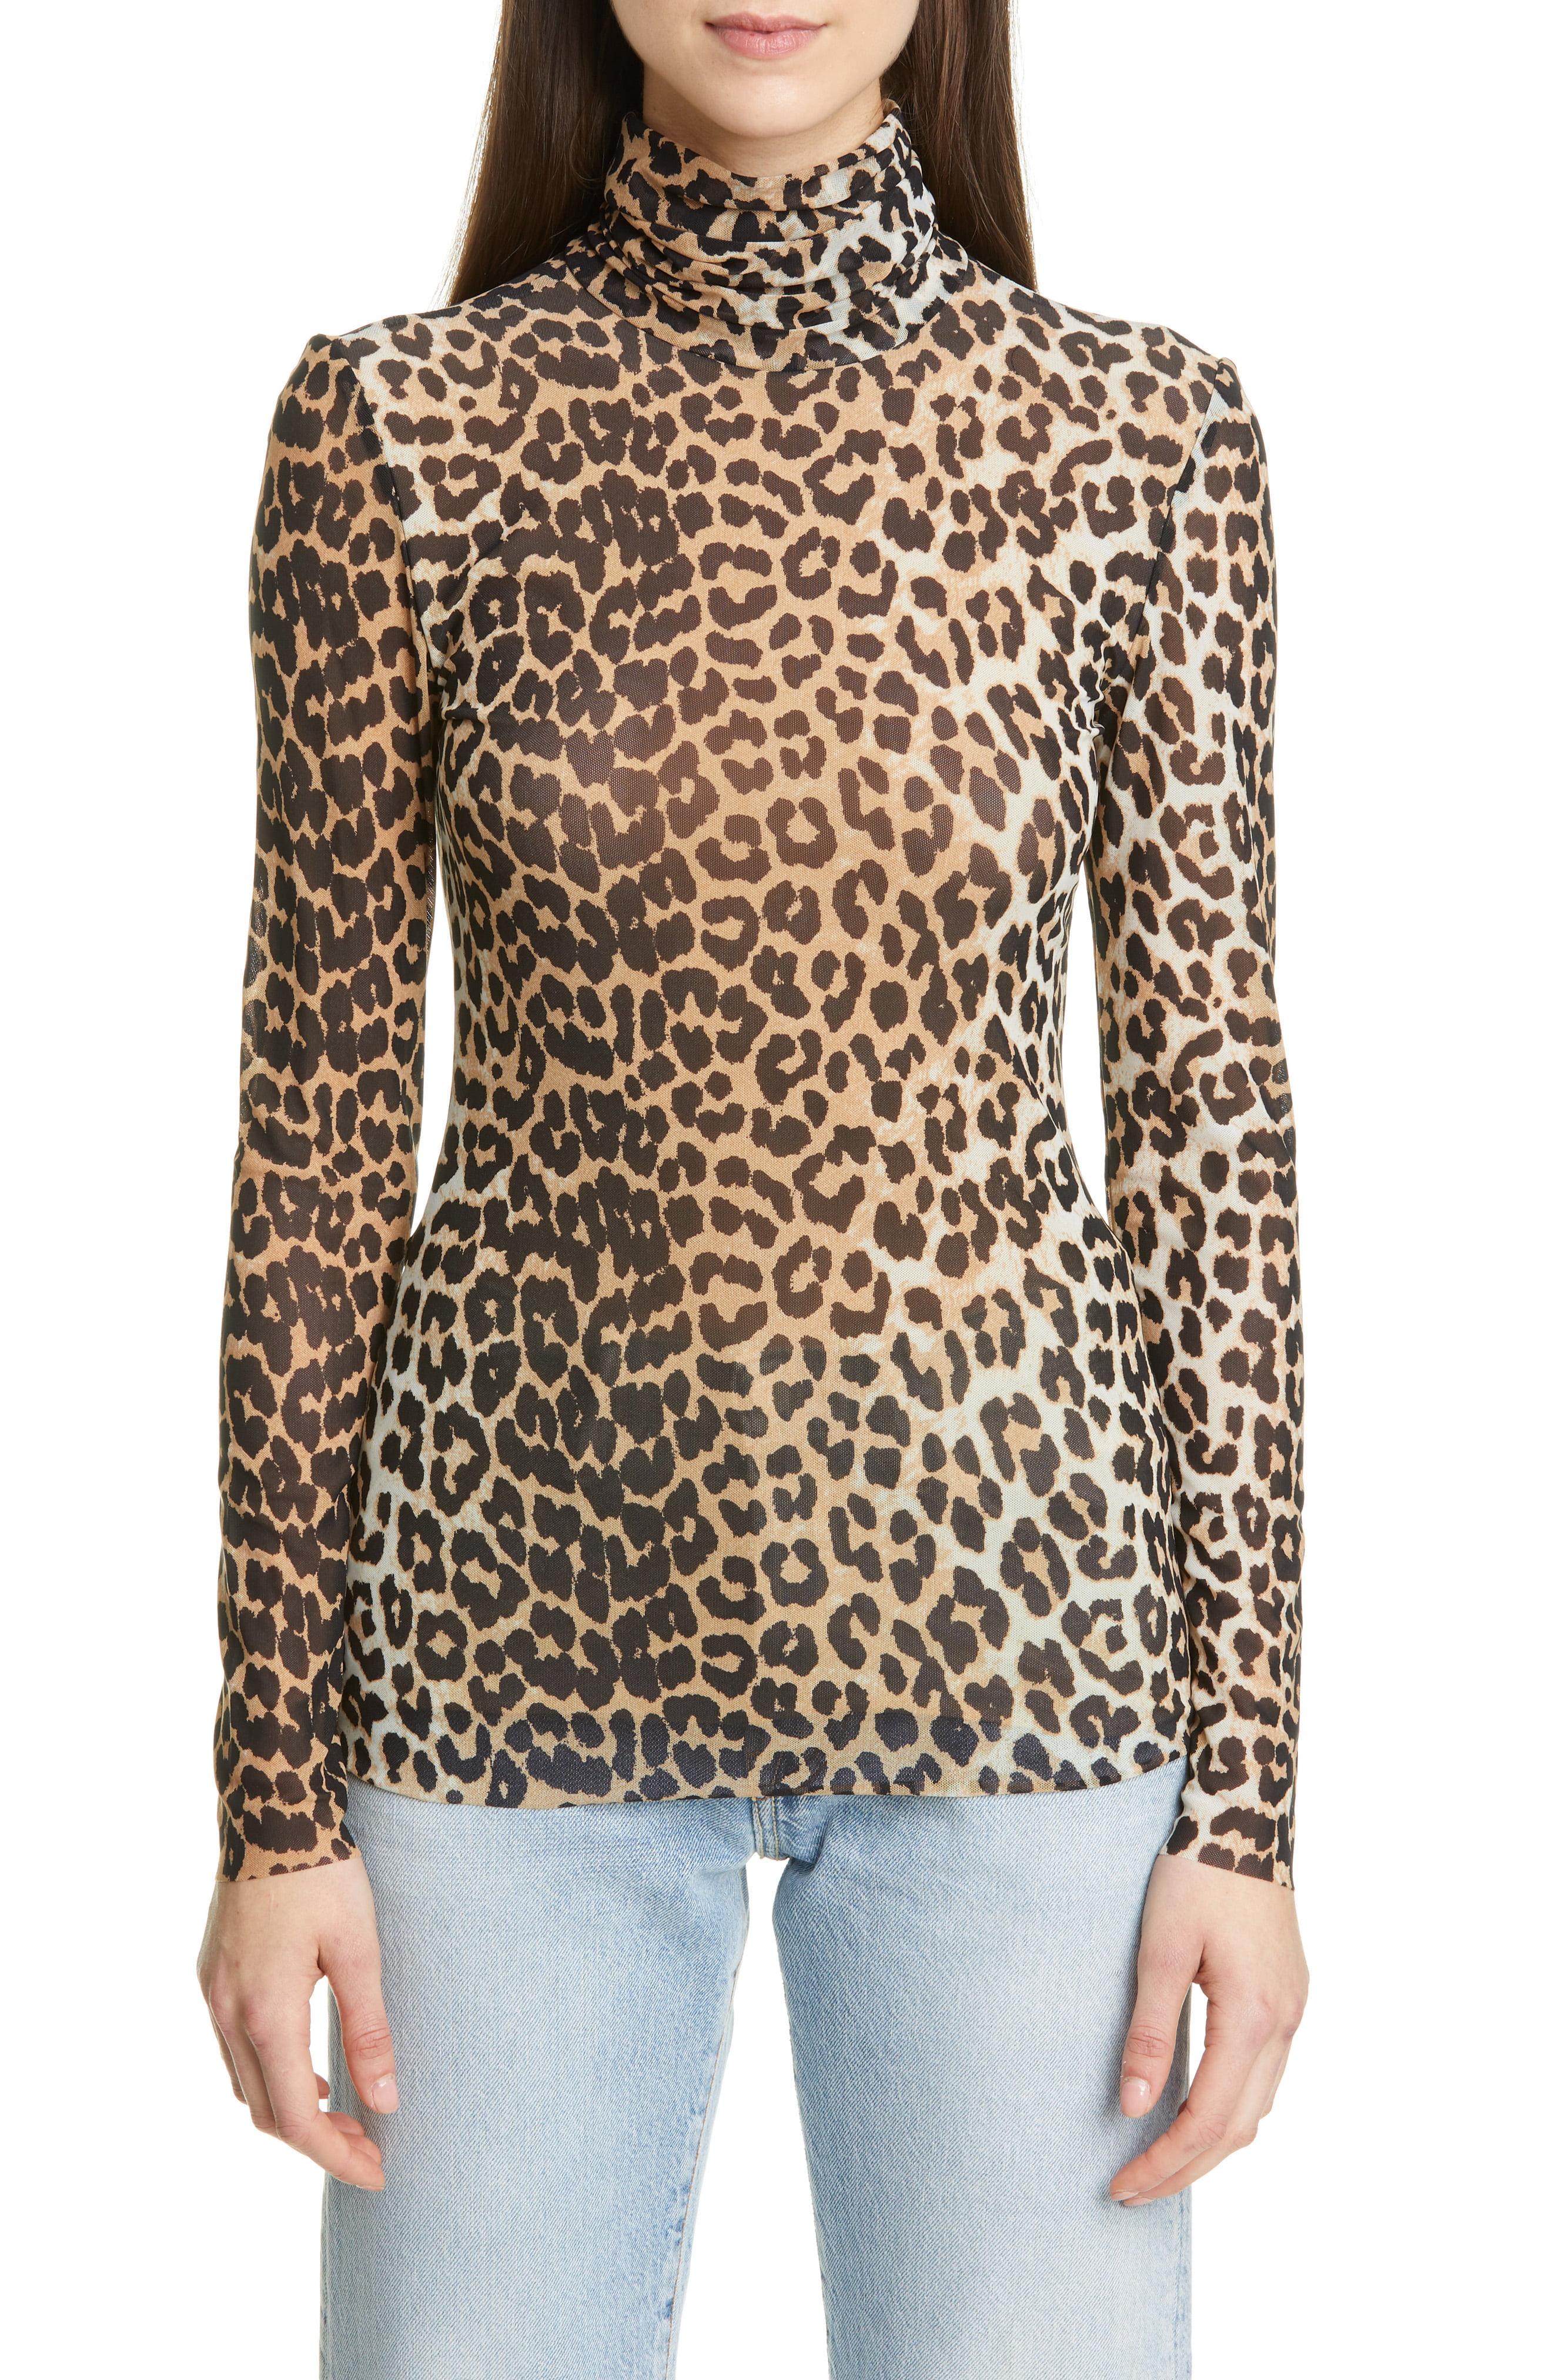 Ganni Synthetic Printed Mesh Leopard Turtleneck in Brown - Lyst